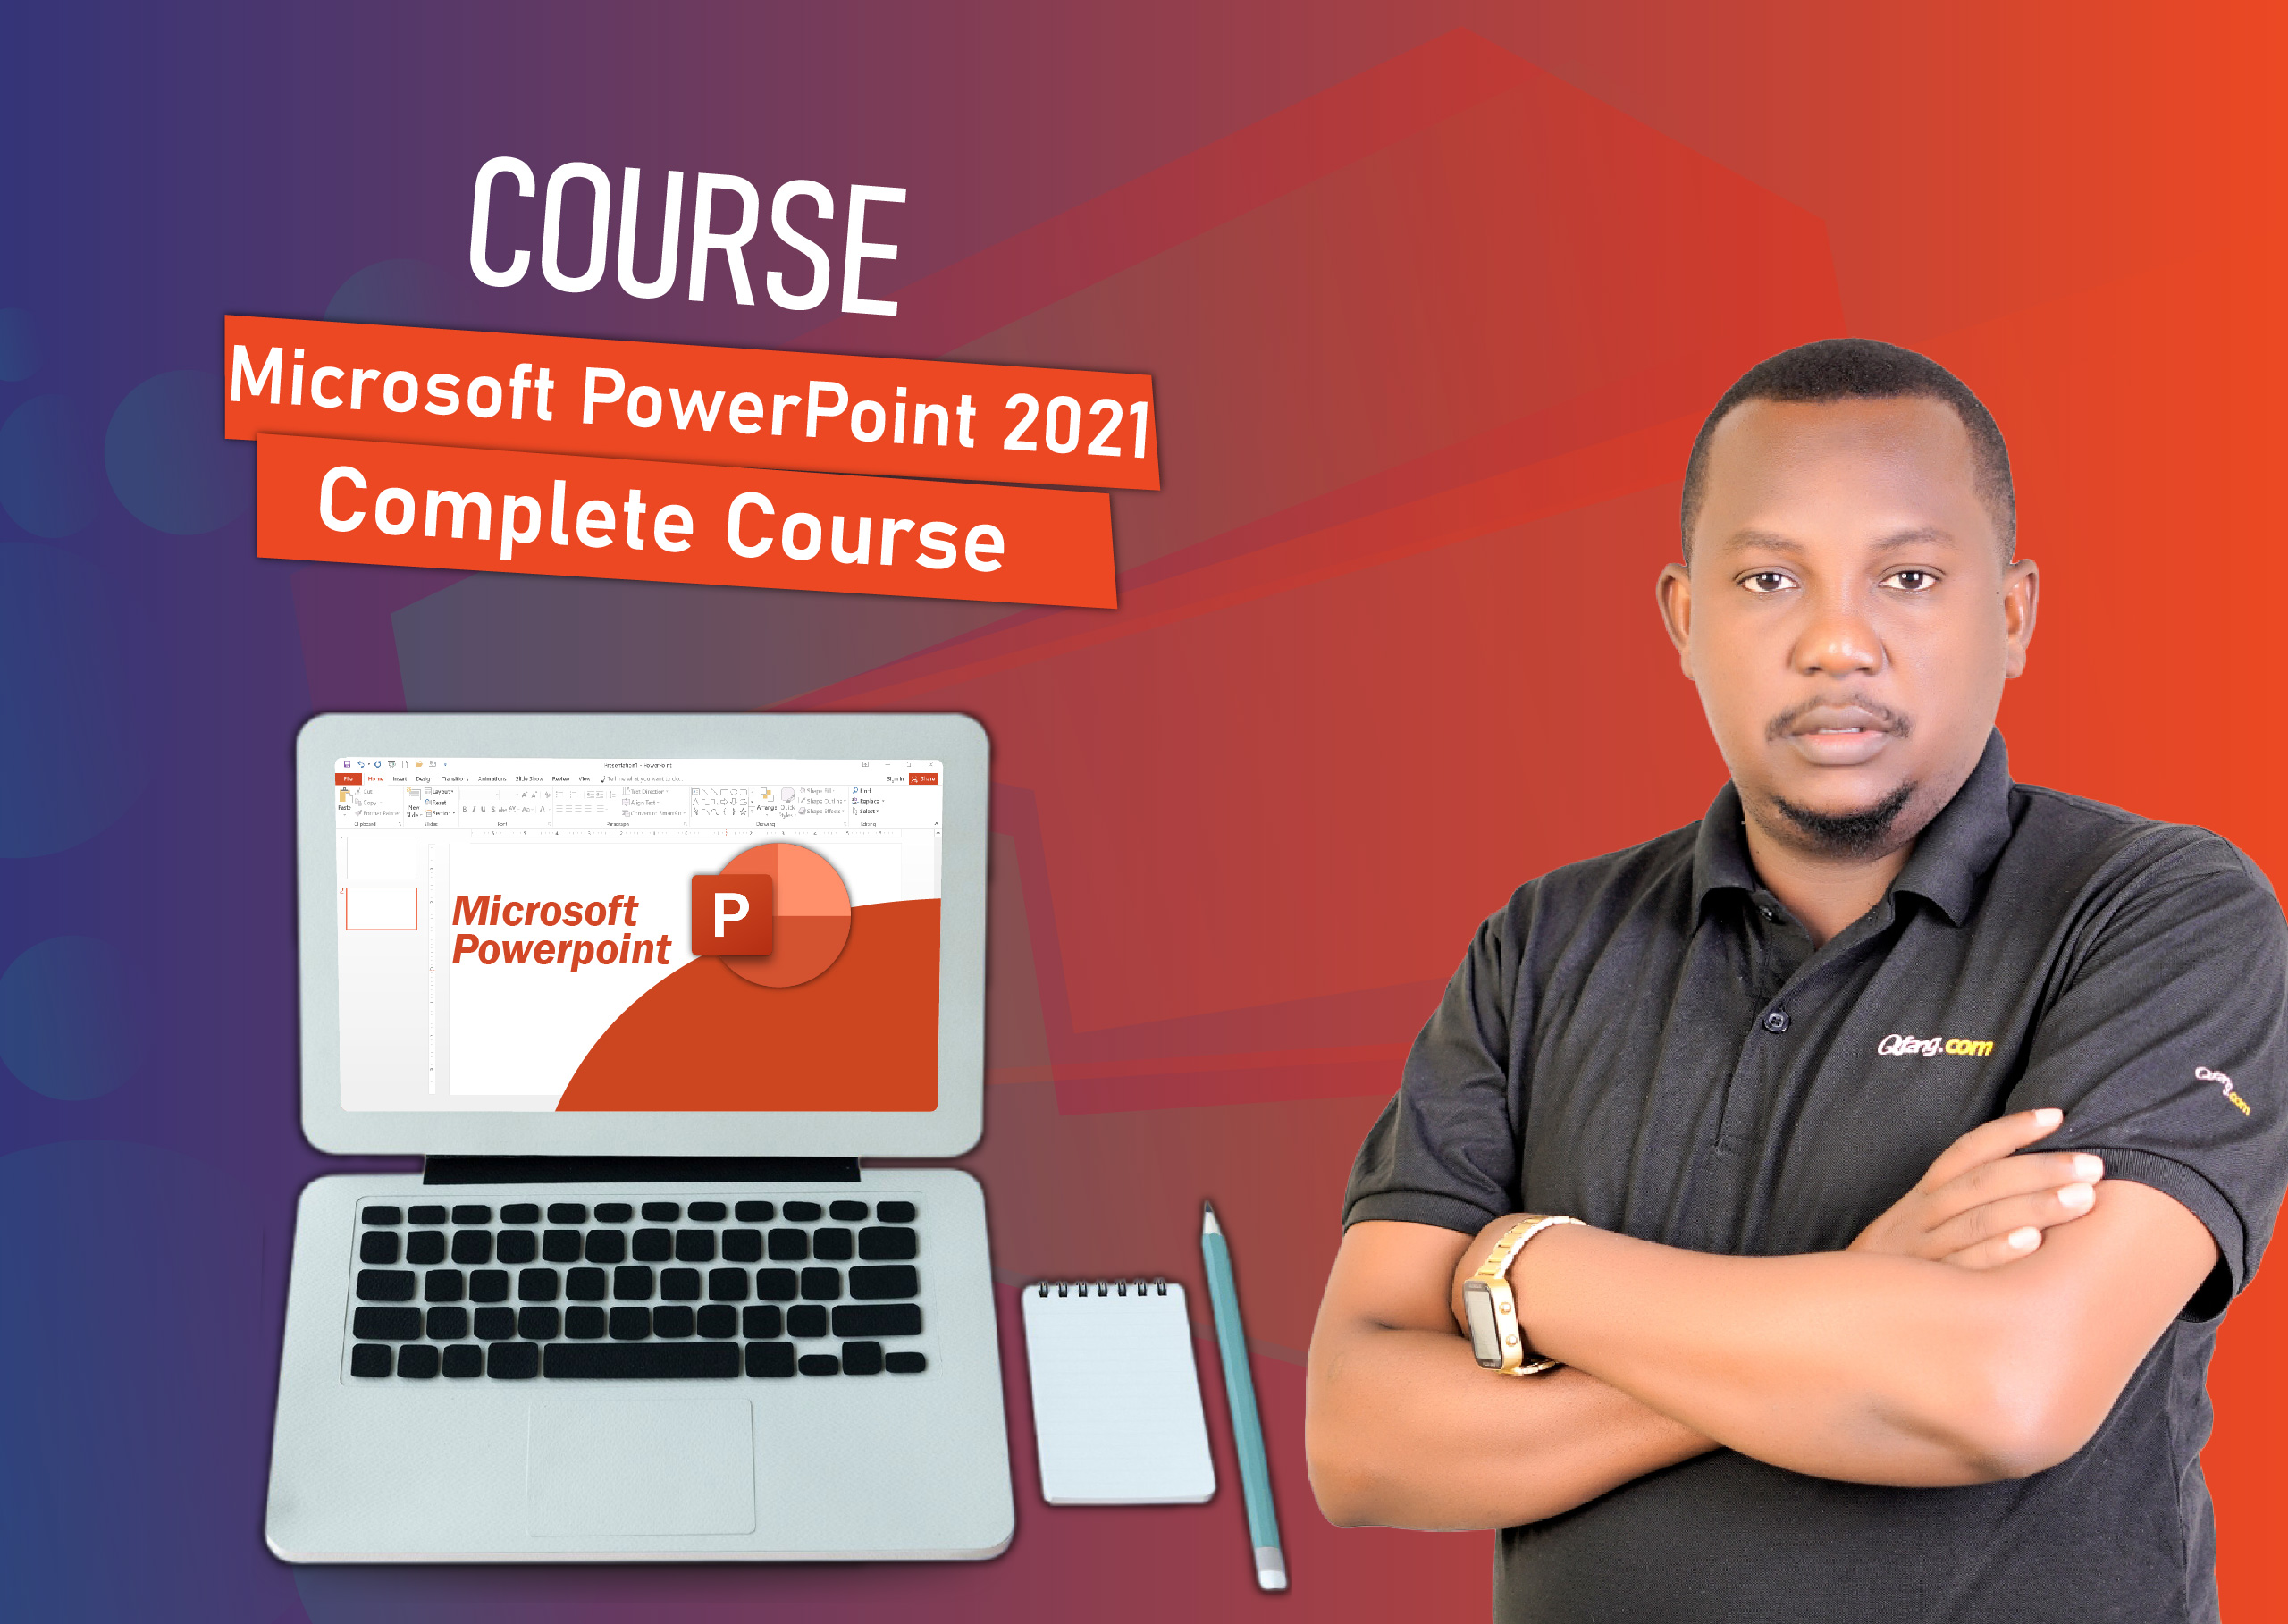 Microsoft PowerPoint 2021 Complete Course